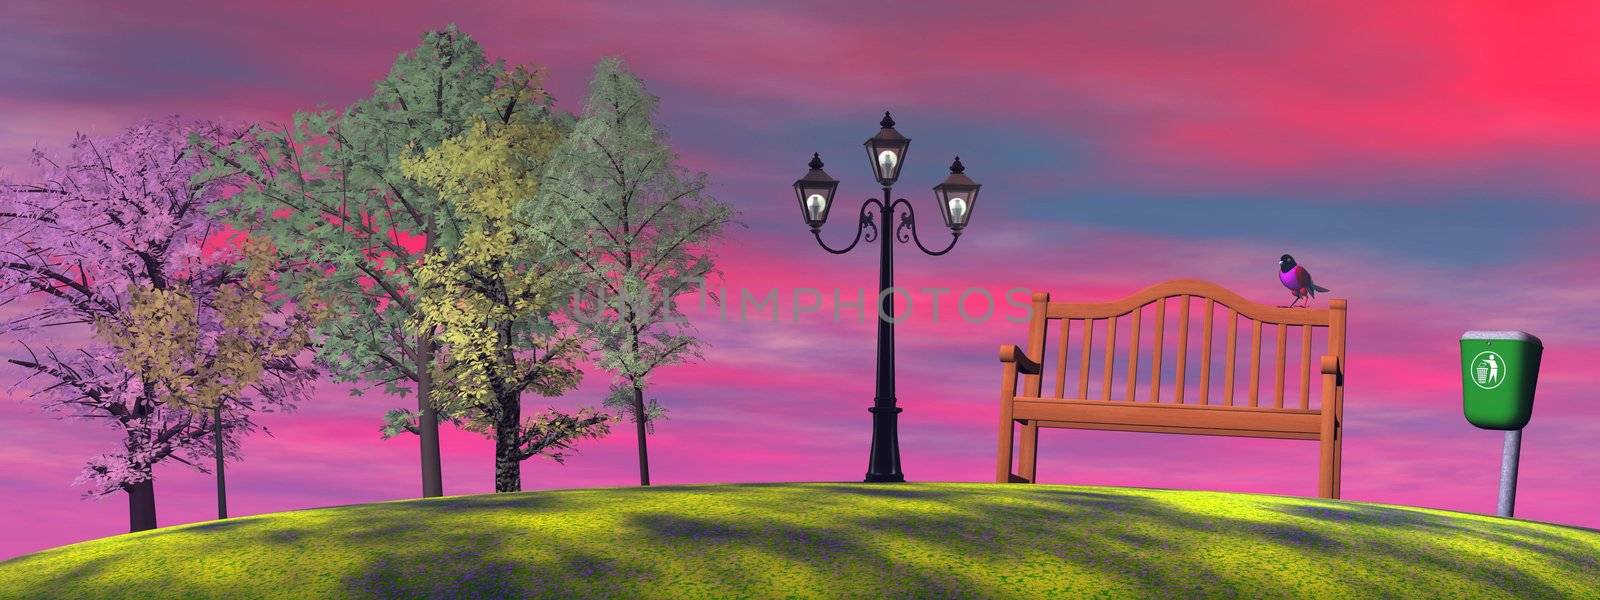 Colorful bird on a wood bench in a park with bin, lamp and trees by sunset